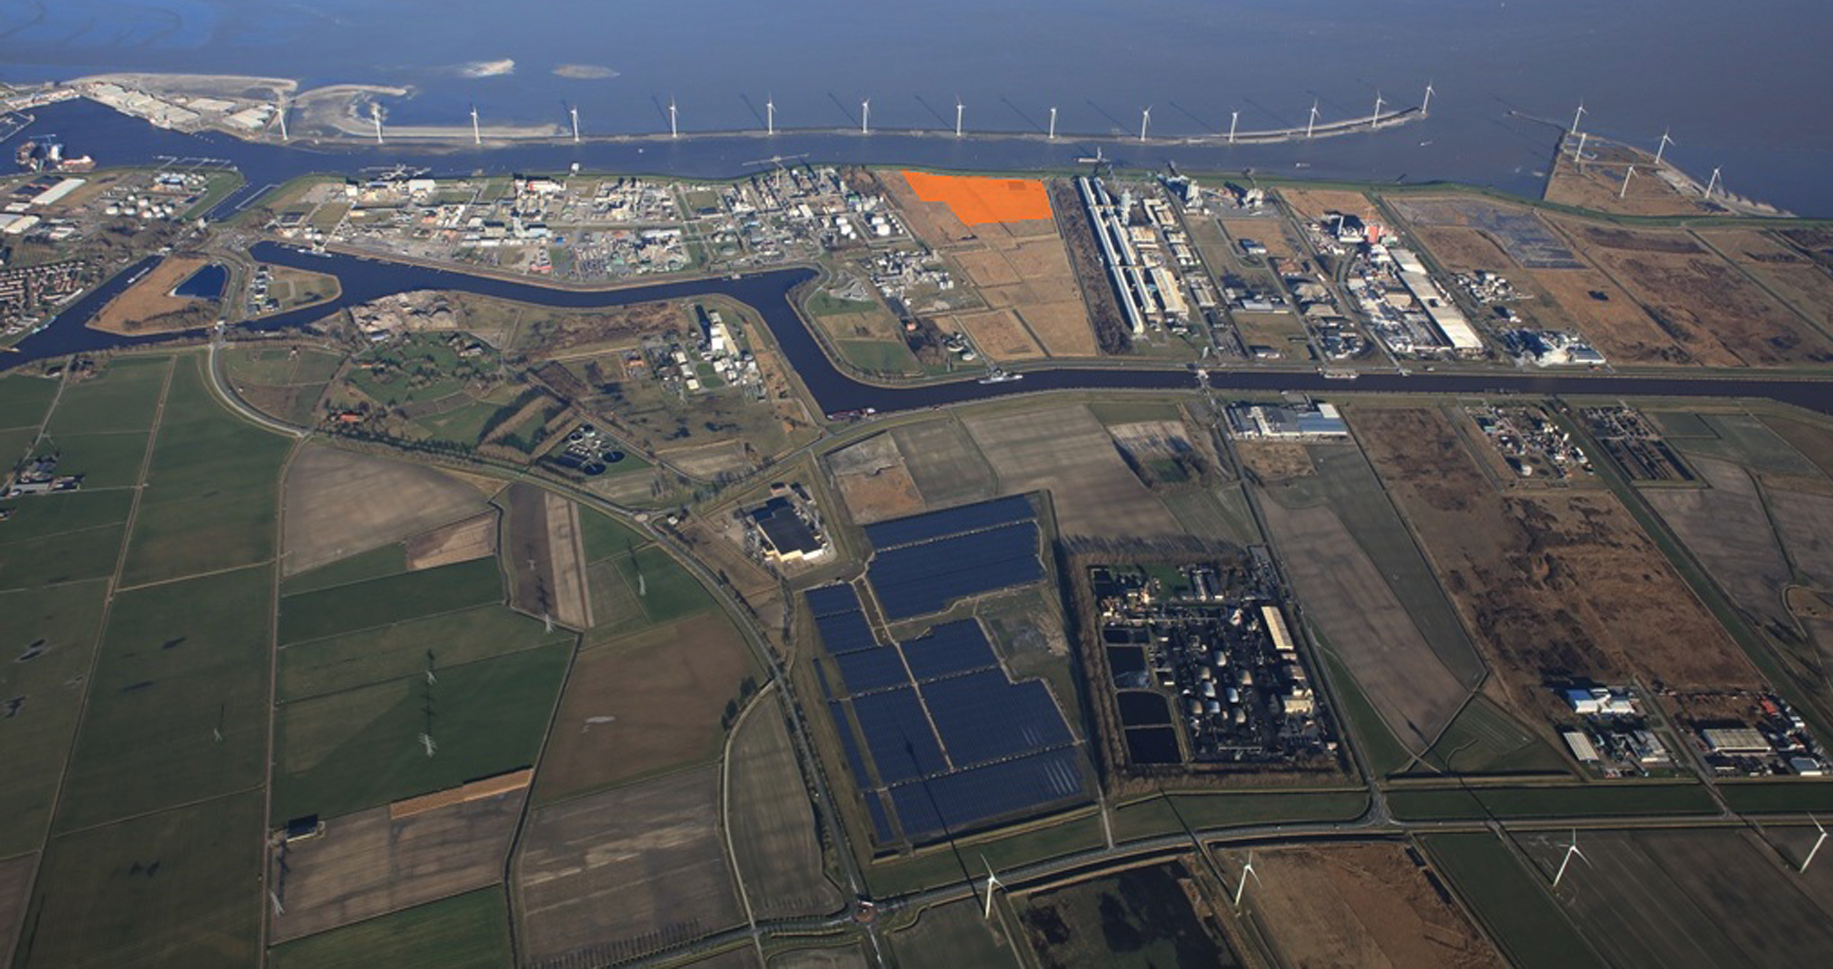 Helicopter view of Delfzijl, The Netherlands